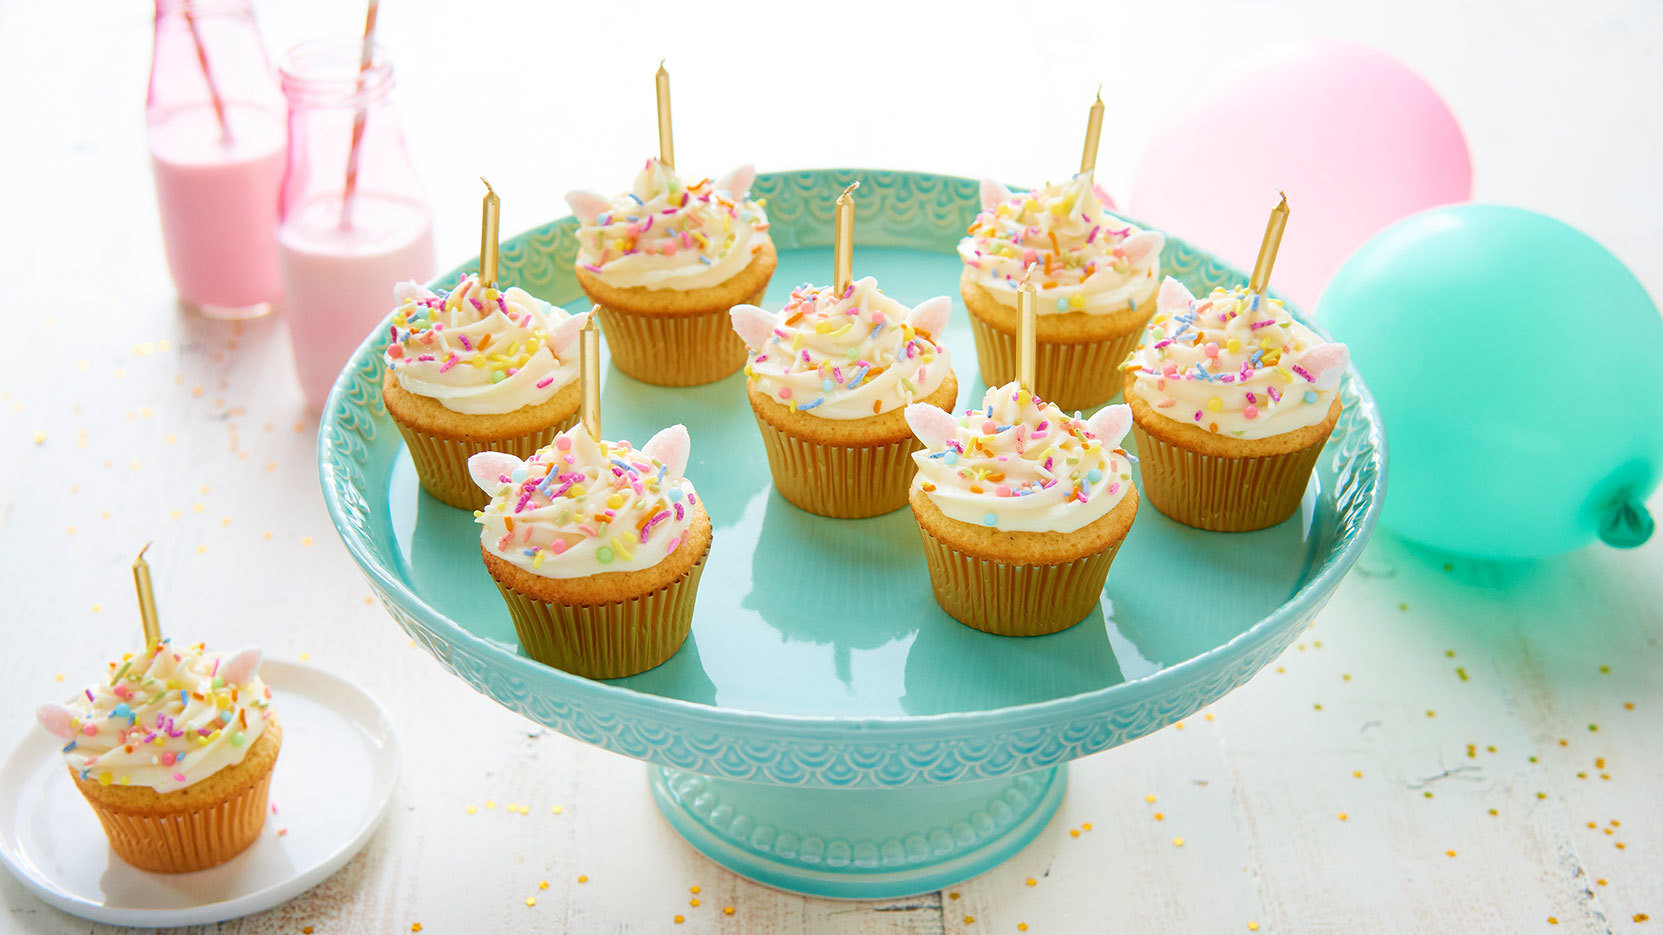 Food Ideas For Unicorn Party
 Magical Unicorn Birthday Party Ideas for Kids EatingWell